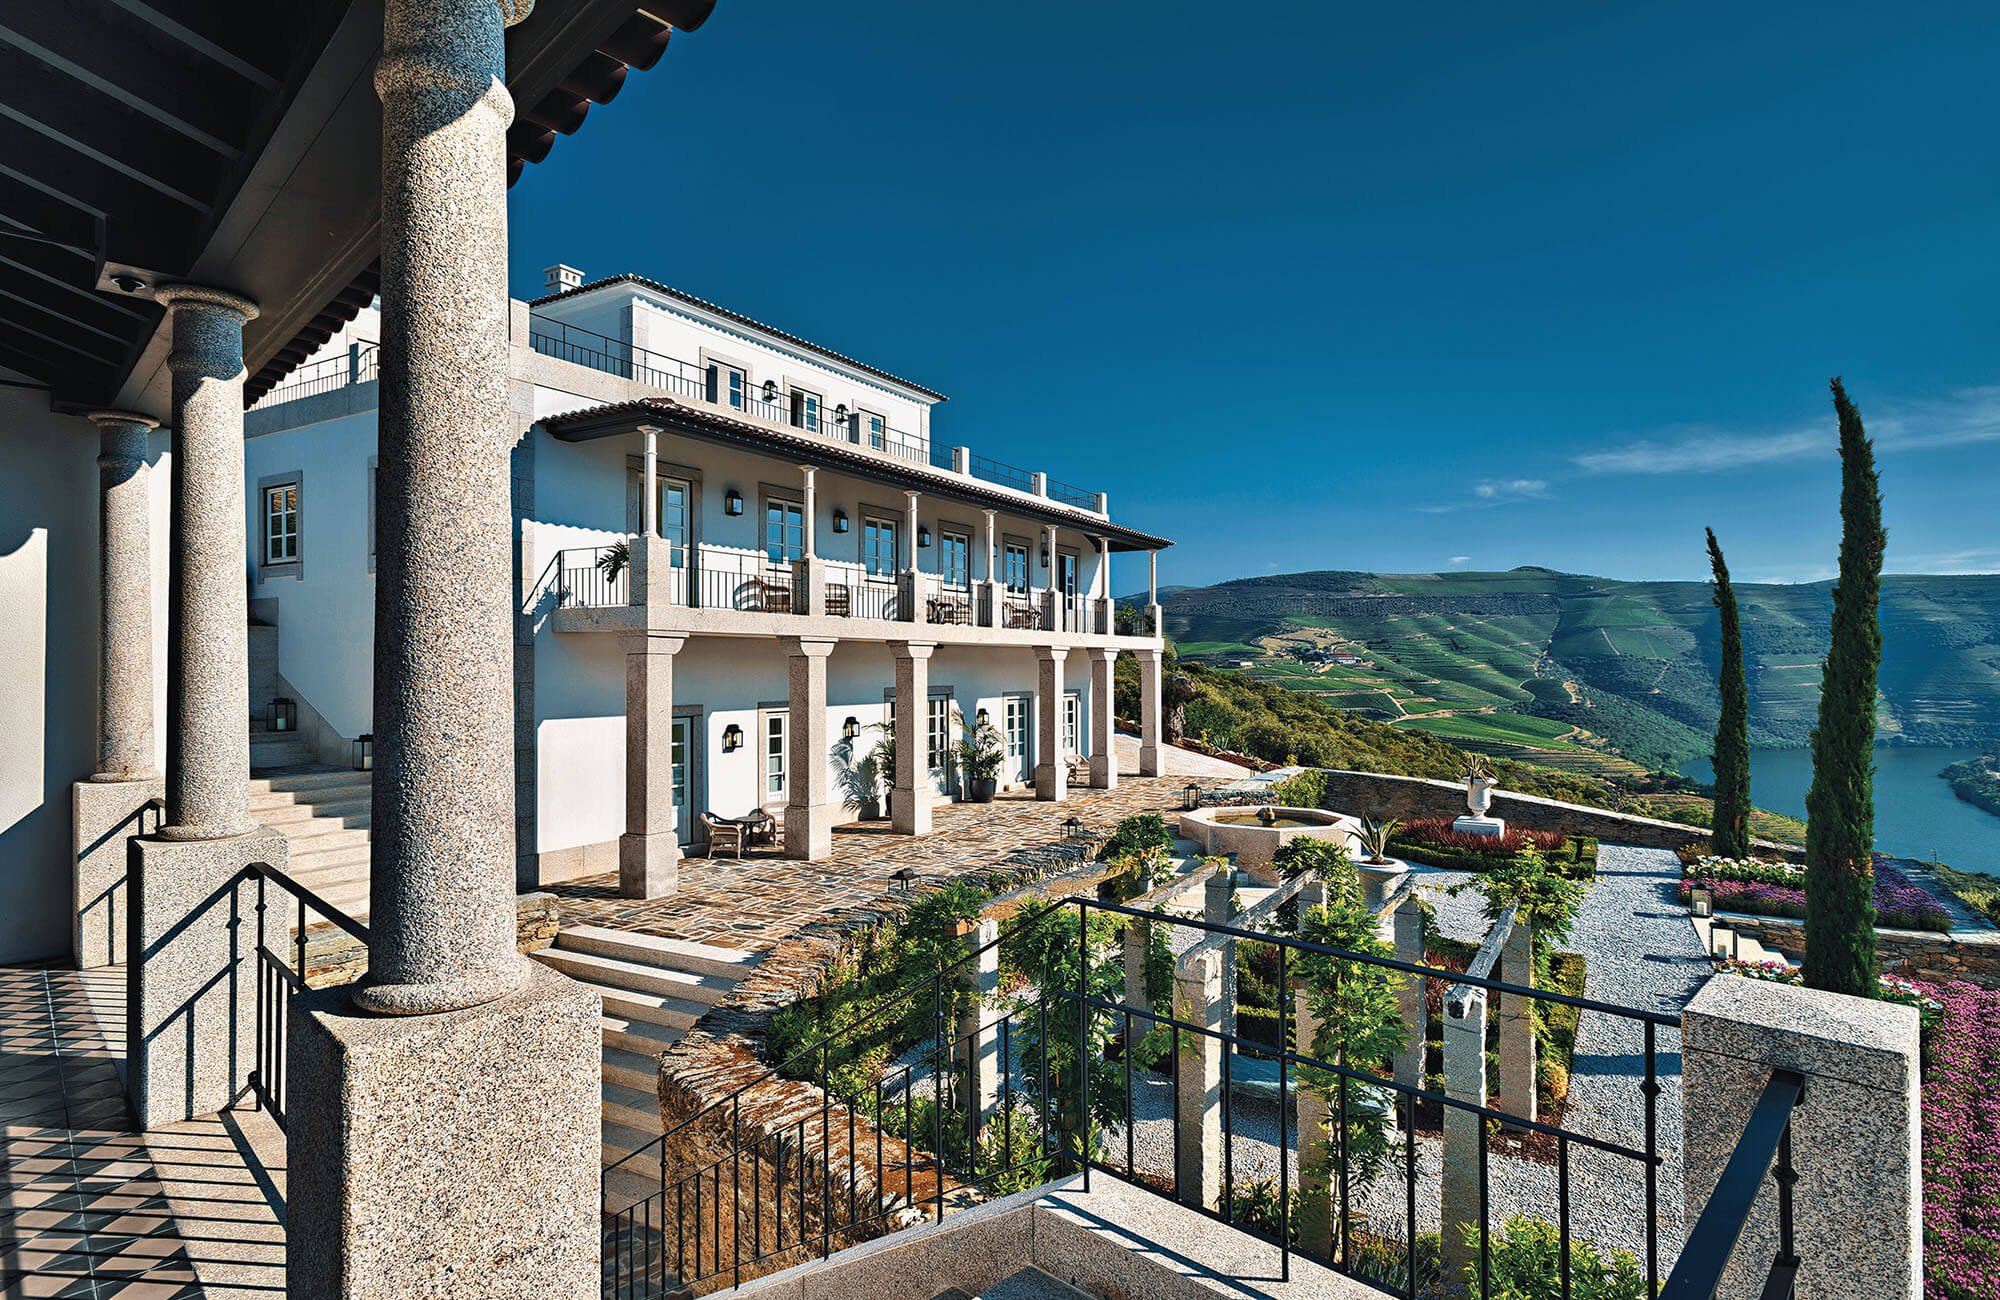 Luxury wine estate with panoramic views of the Douro Valley in Portugal